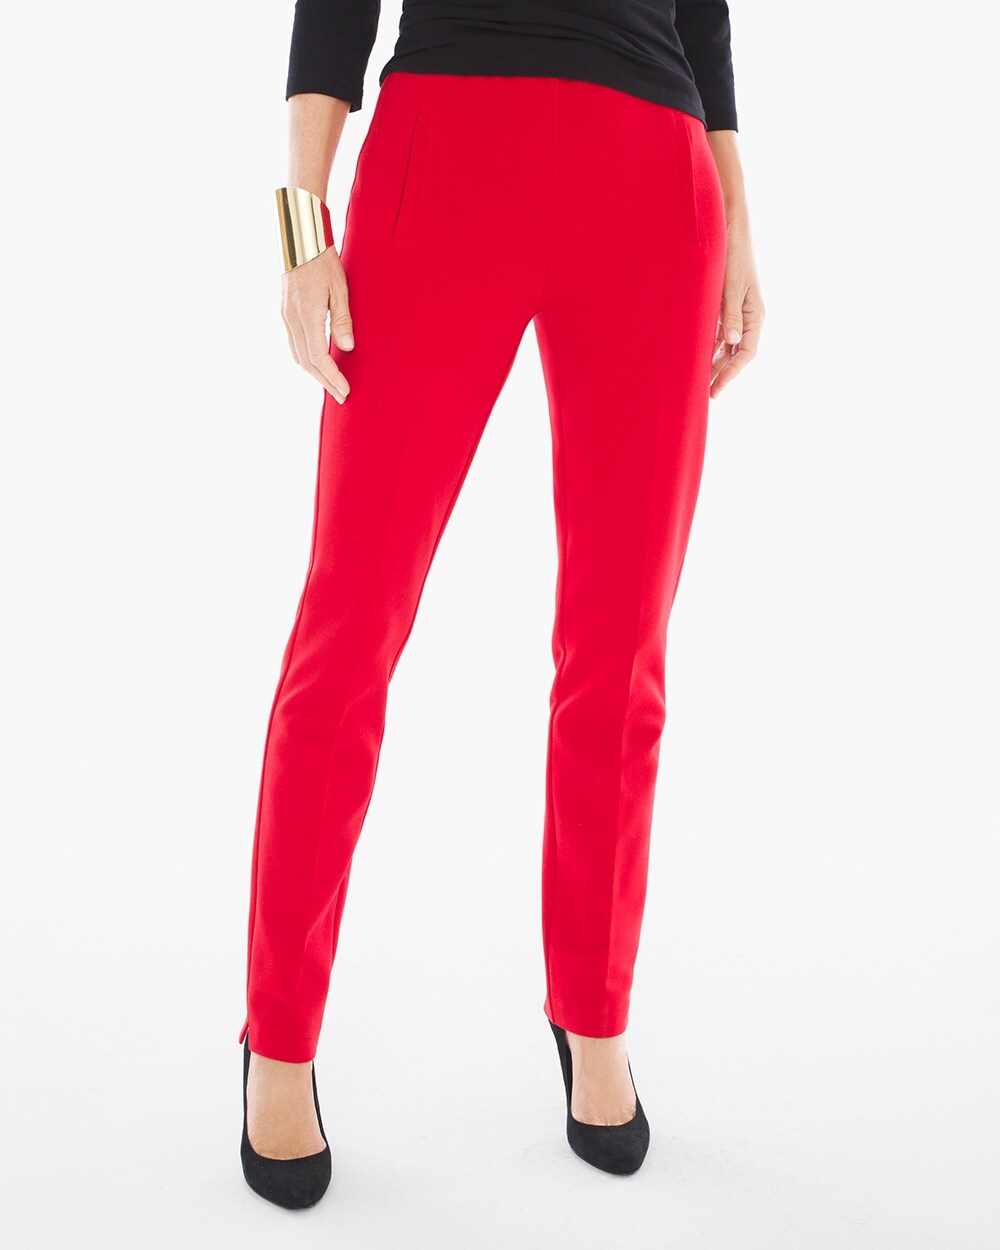 Juliet Ankle Pants in Barbados Cherry